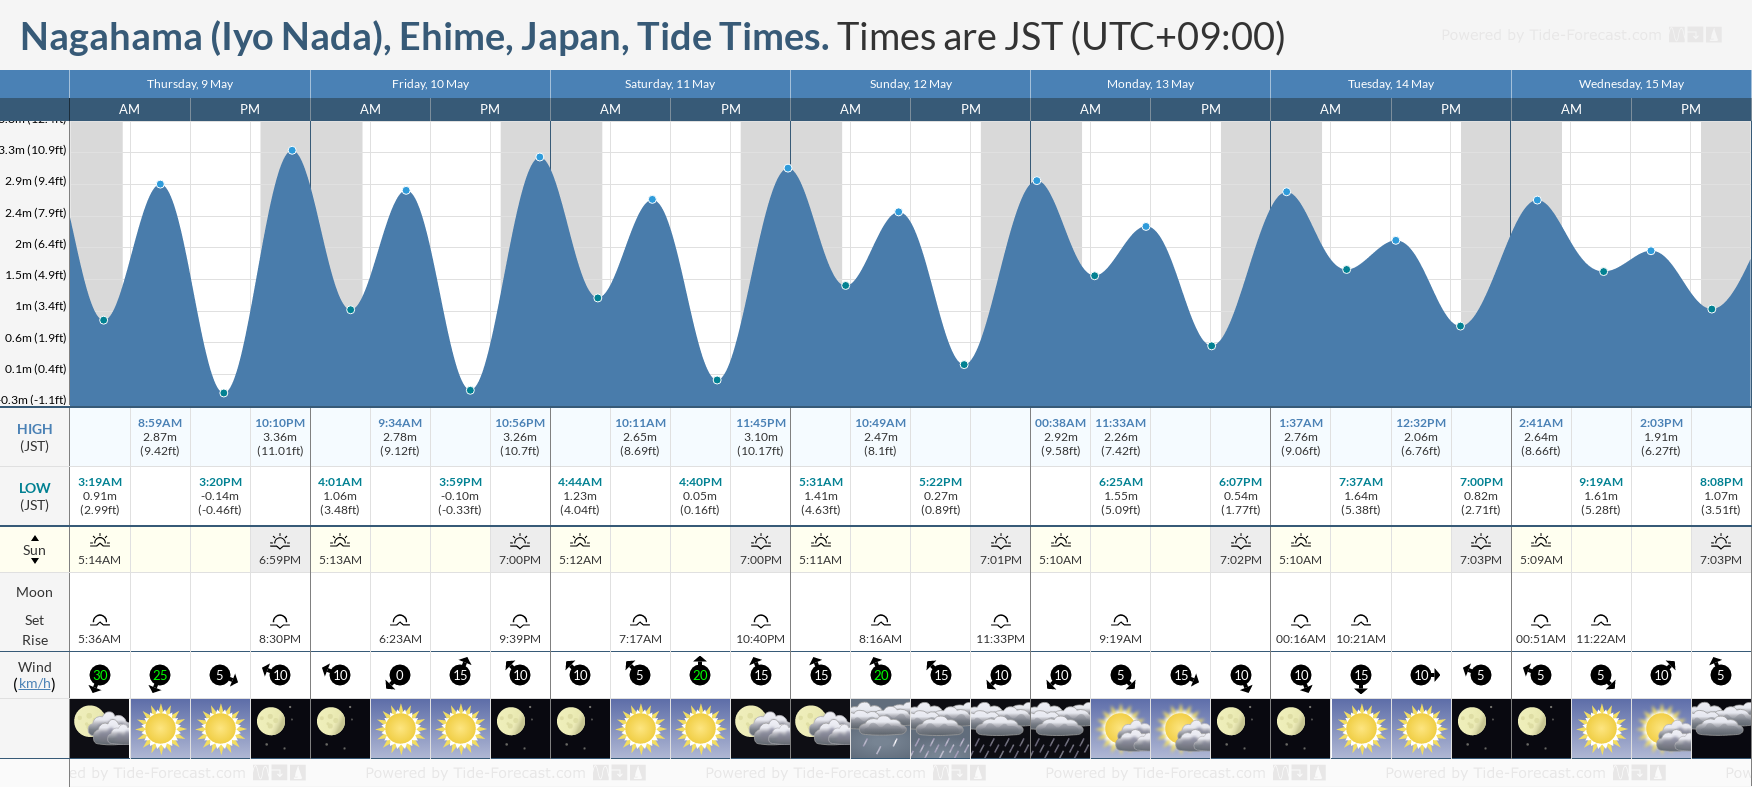 Nagahama (Iyo Nada), Ehime, Japan Tide Chart including high and low tide times for the next 7 days